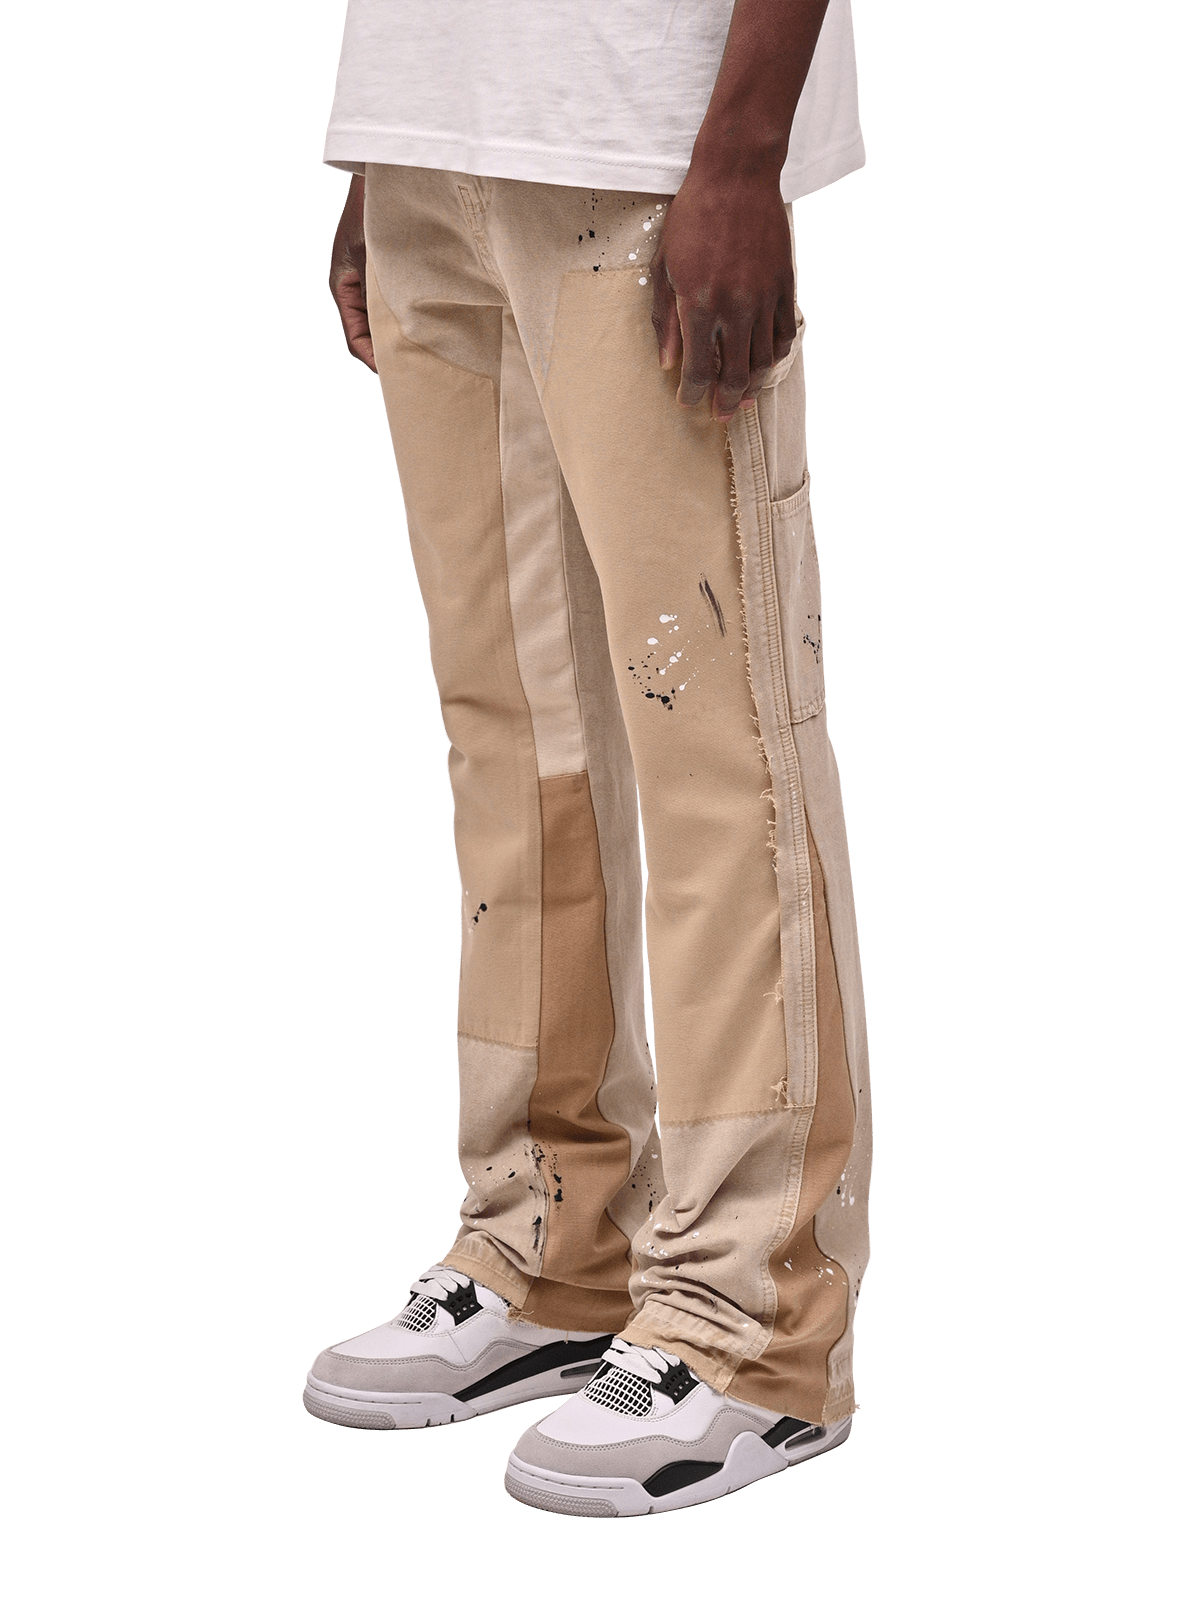 Flare Canvas Pants - Taupe